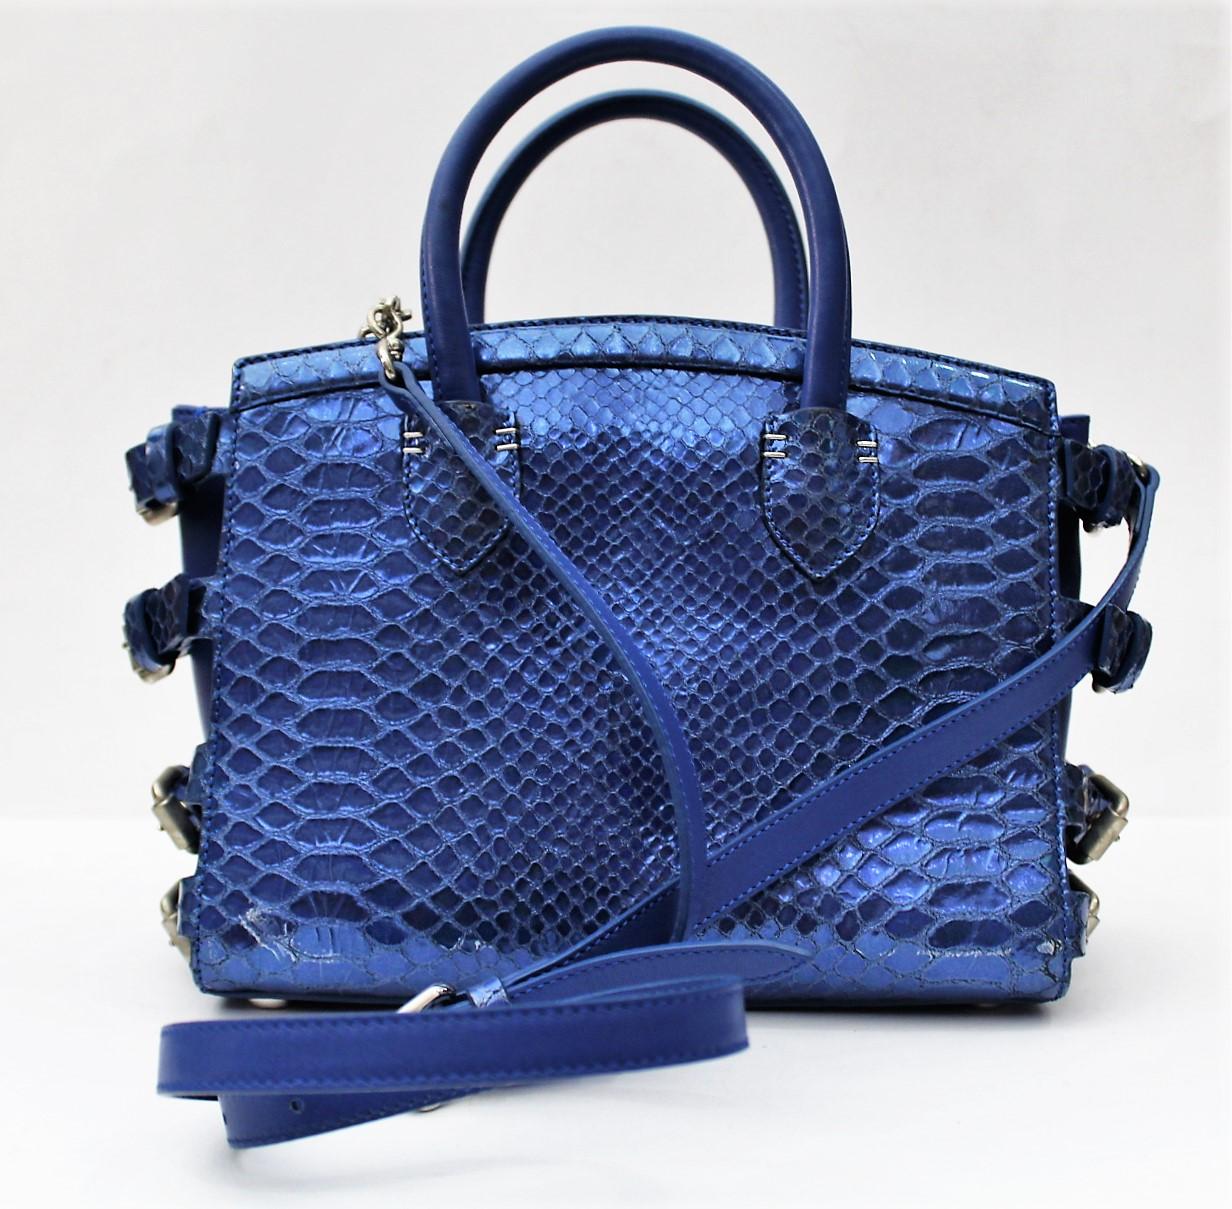 Giuseppe Zanotti G17 bag. Python patterned leather fabric in electric blue color.
Logo in metal and silver finishes. Double leather handle. Made of three internal compartments,
and one outside. Lined internally in fabric, with spotted pocket.This